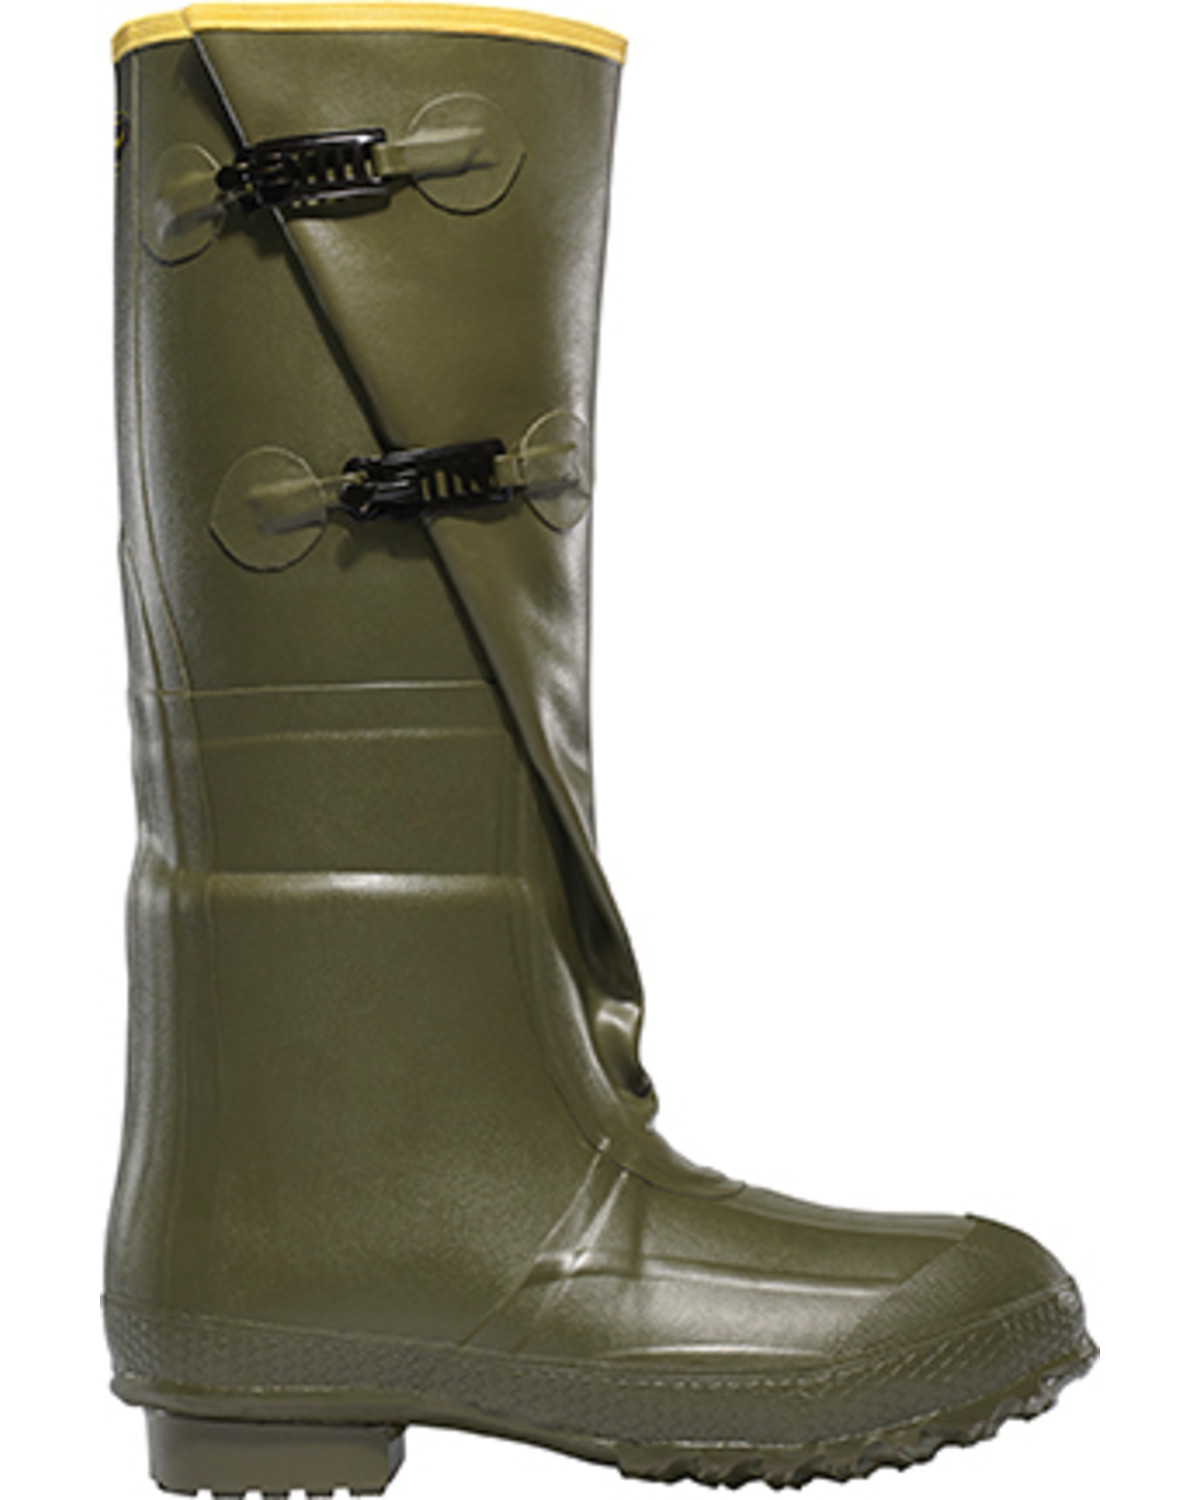 LaCrosse Men's Insulated 2-Buckle 18" Hunting Boots - Round Toe